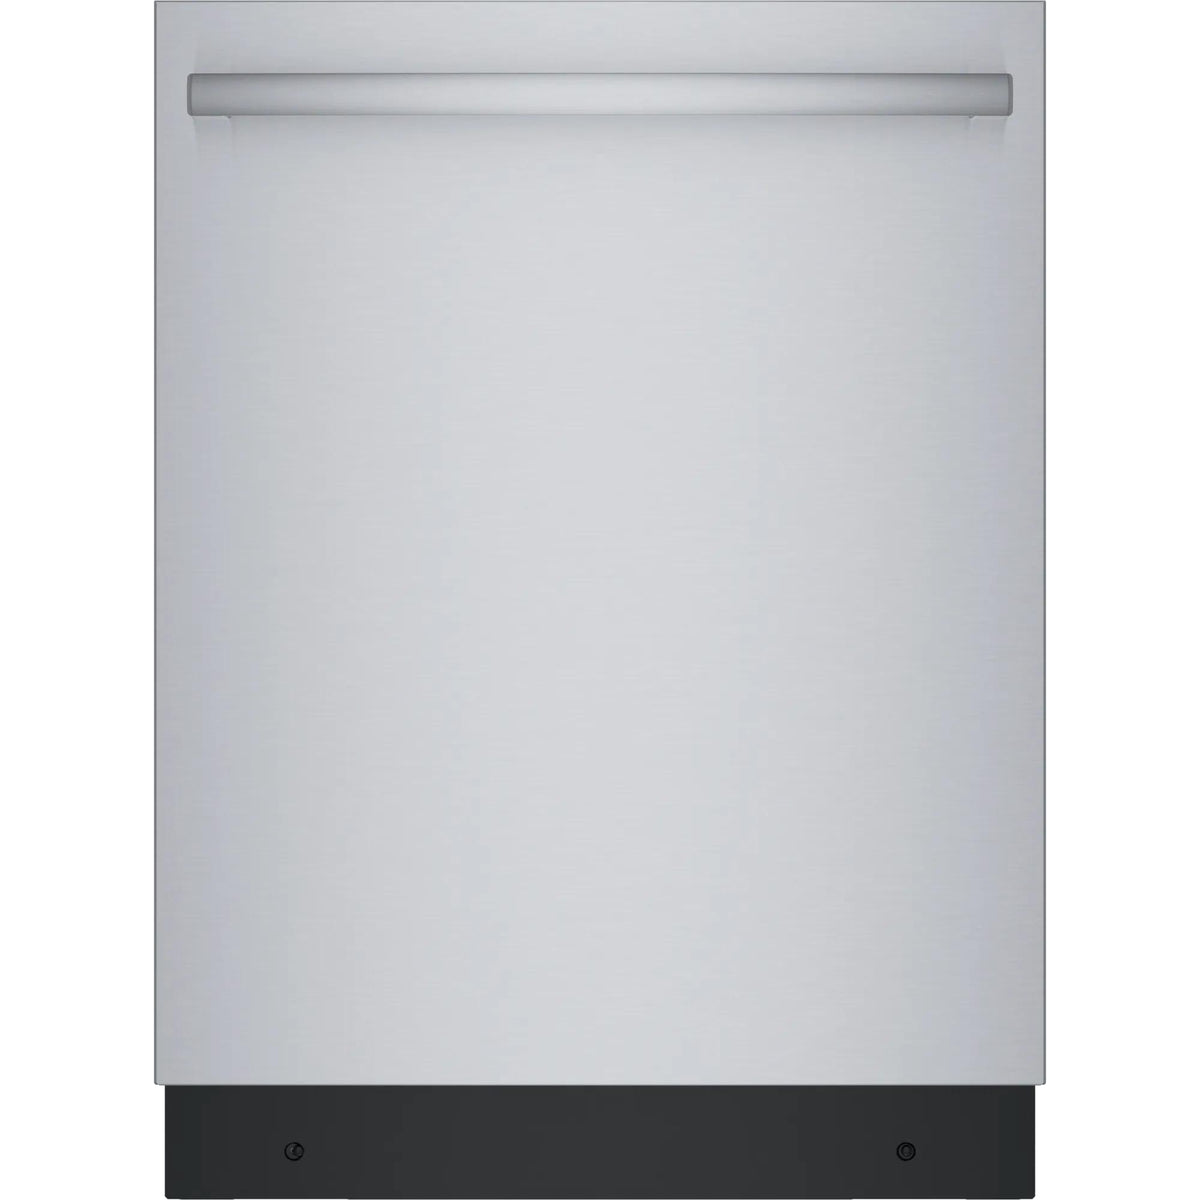 24-inch Built-in Dishwasher with Wi-Fi Connectivity SGX78C55UC IMAGE 1